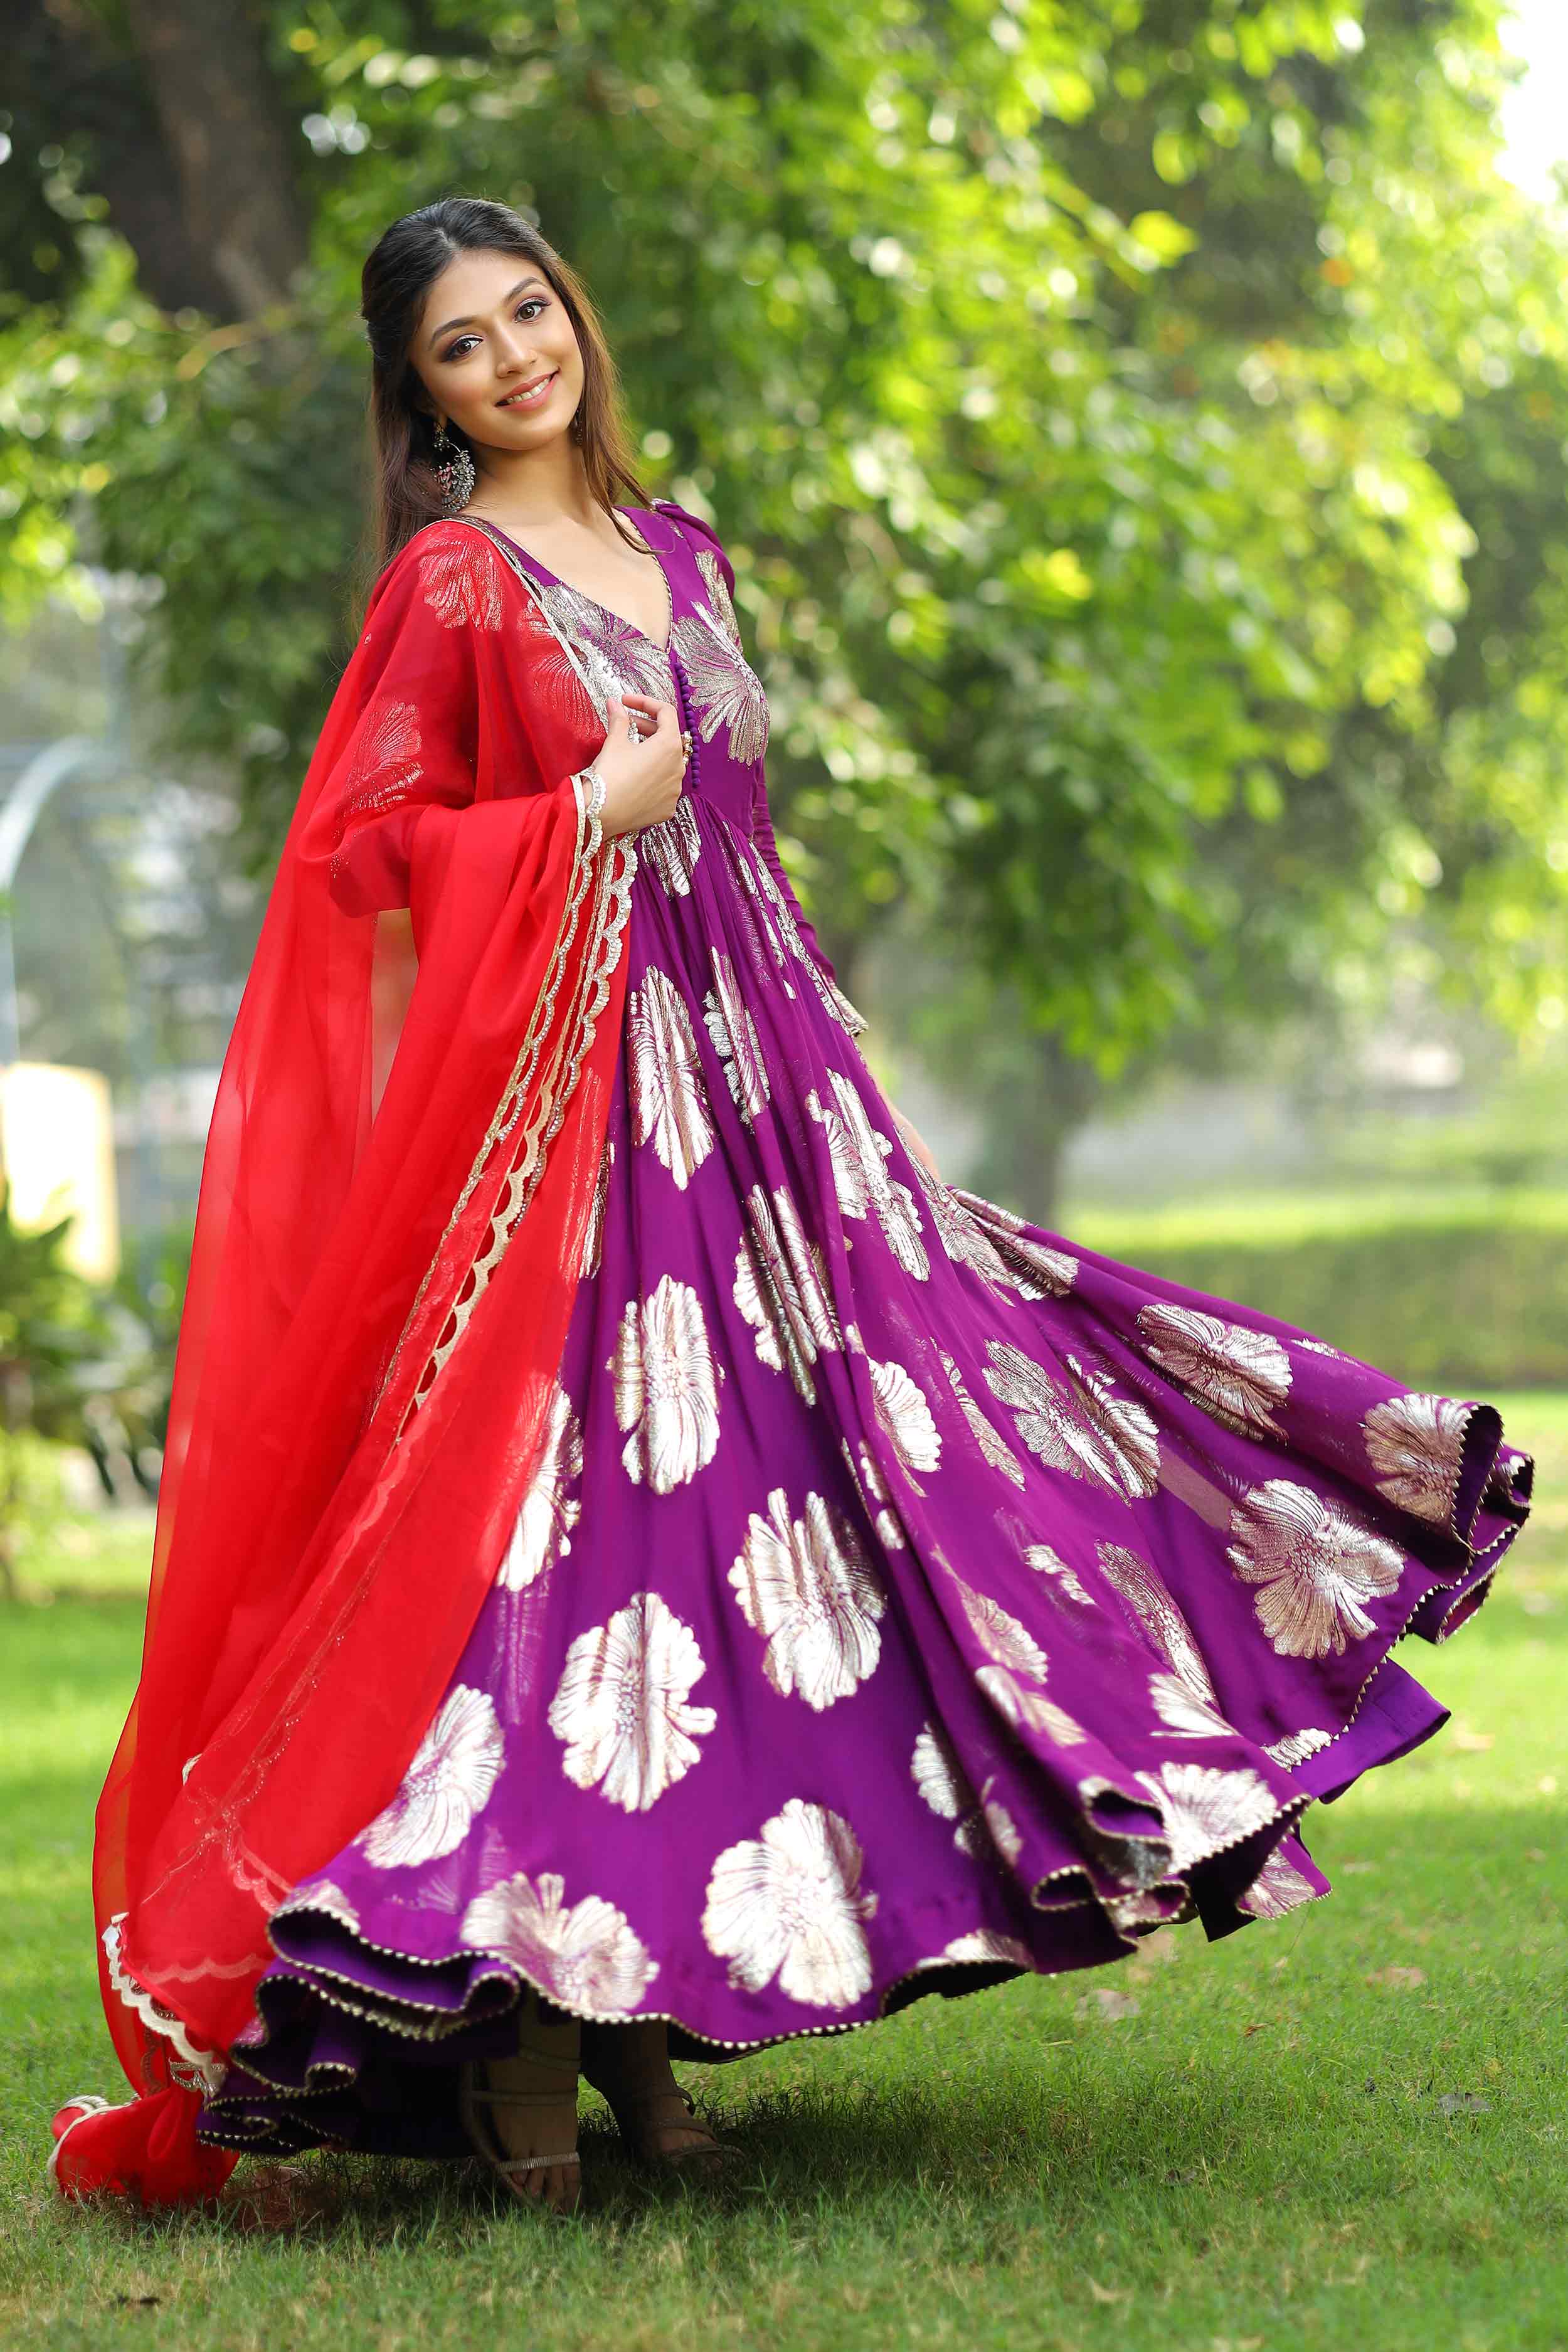 a woman in purple dress and red dupatta